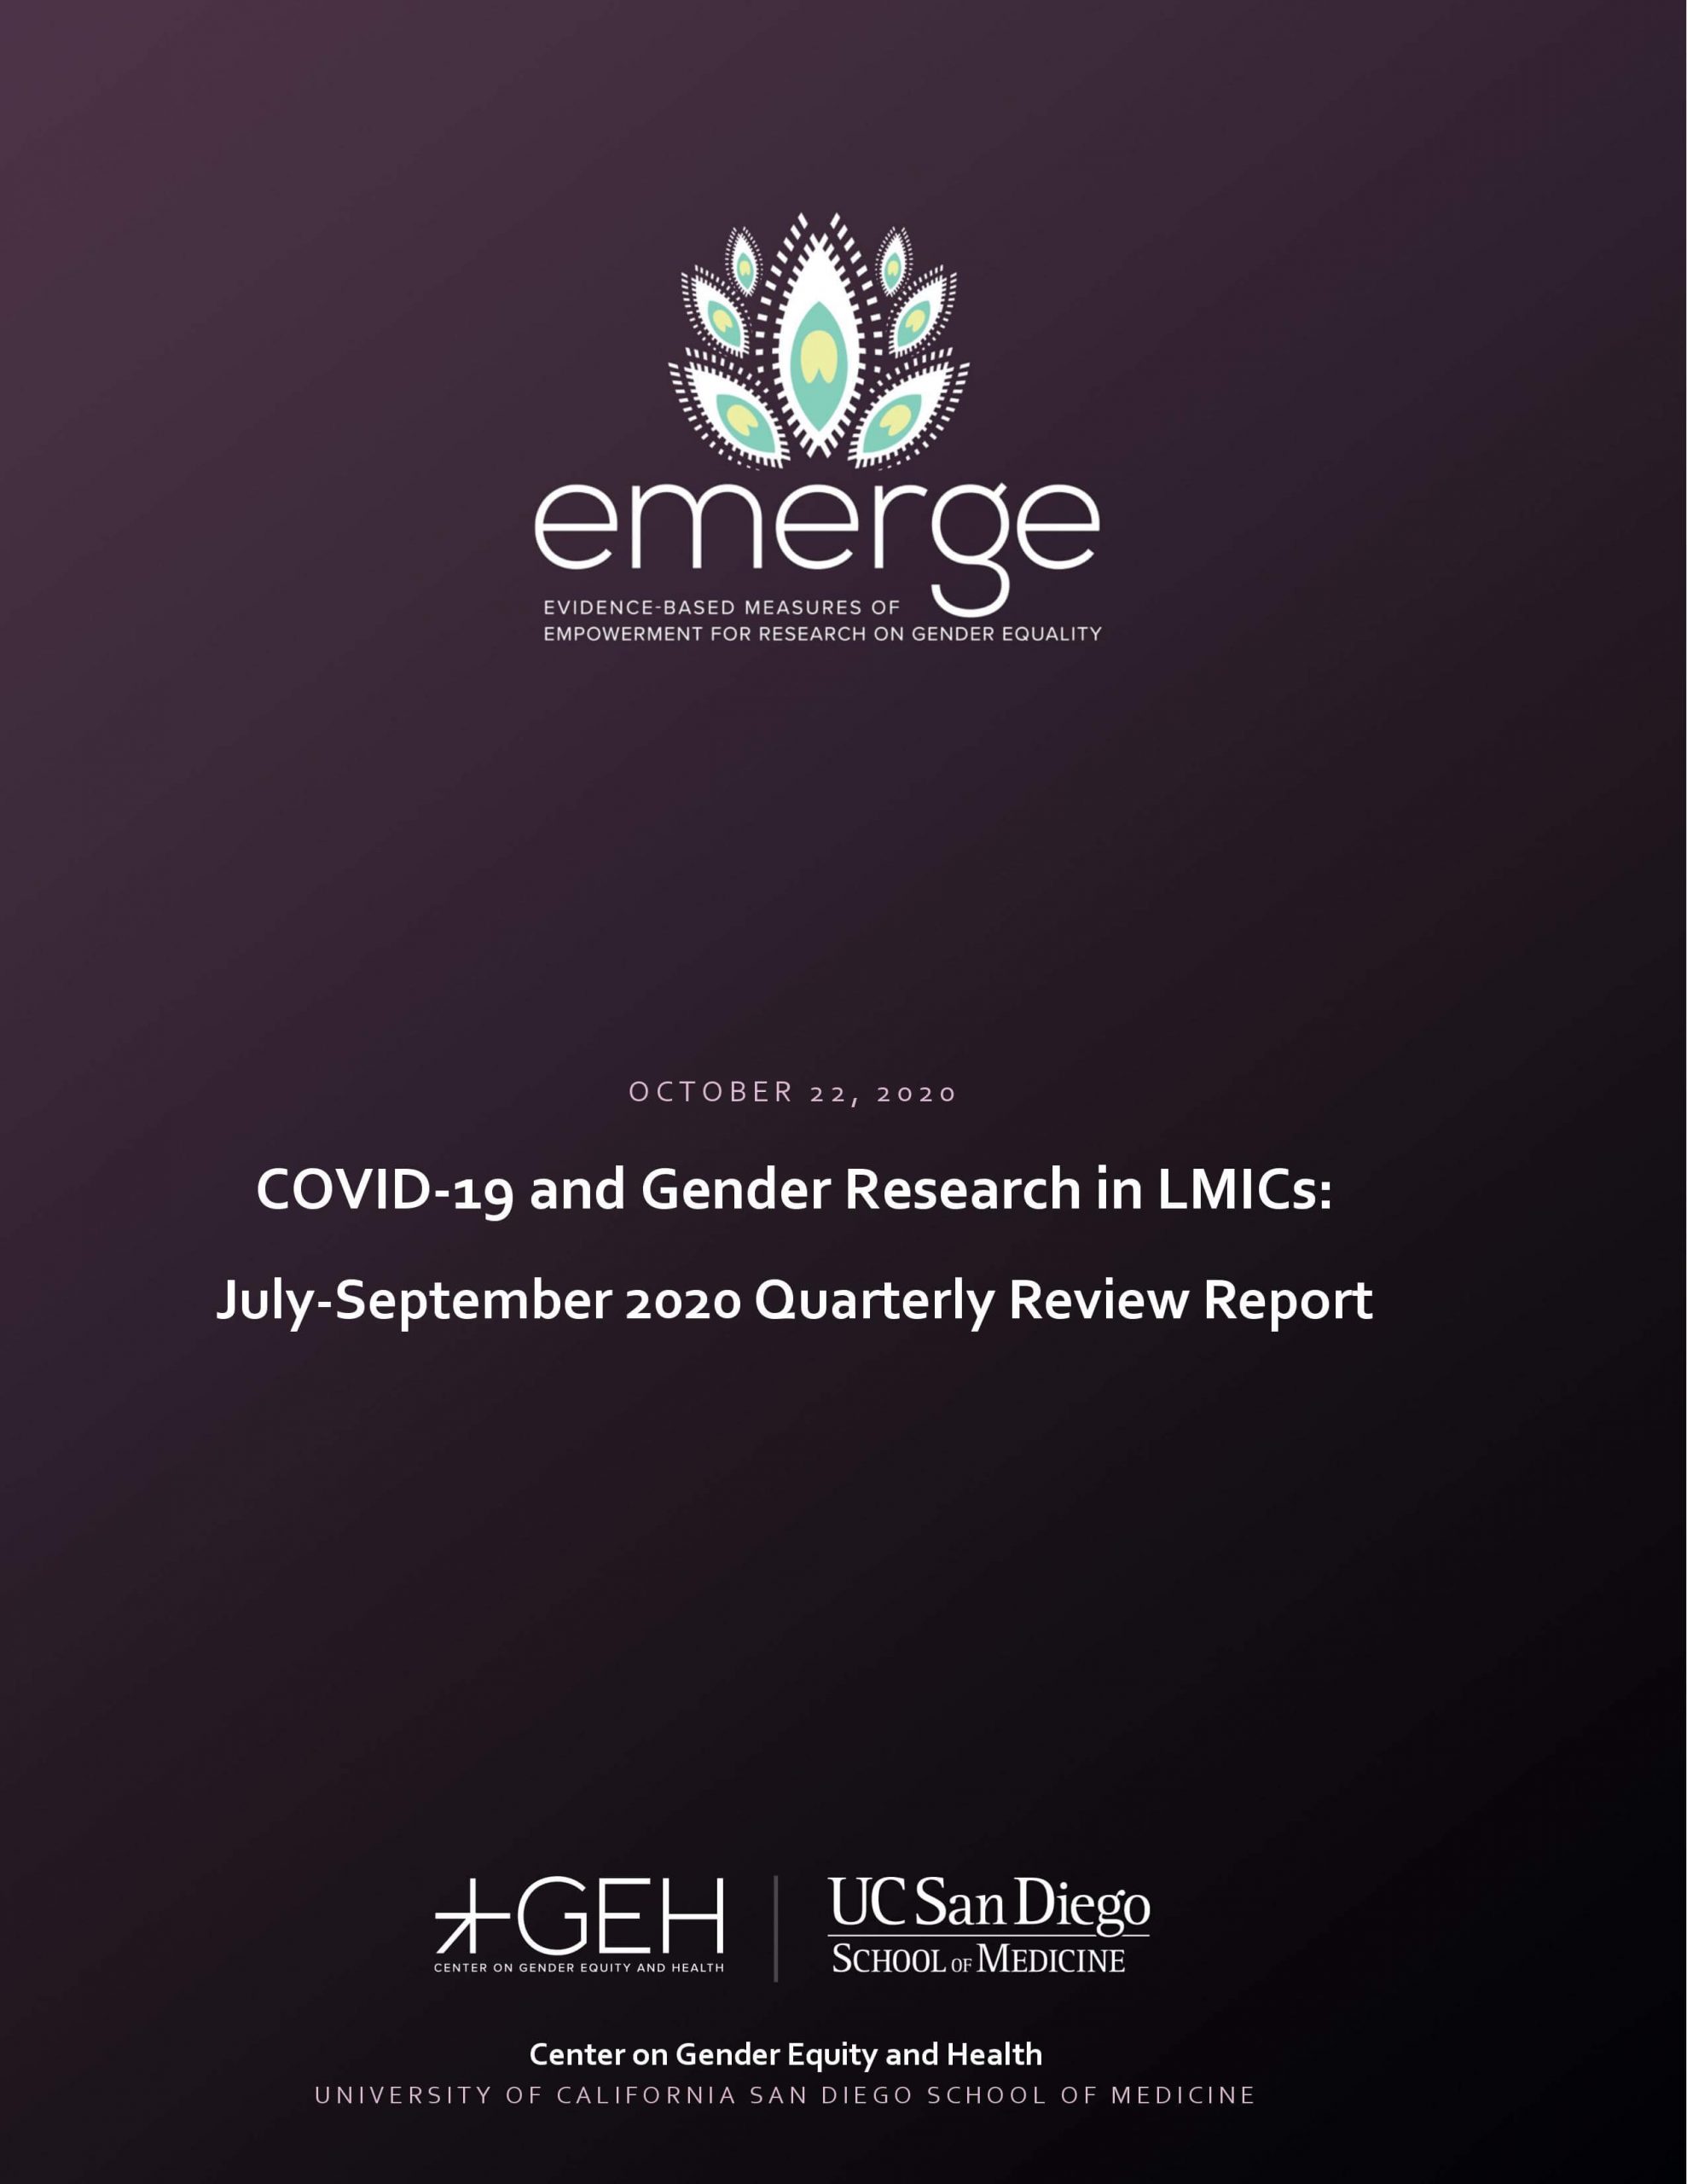 COVID-19 and gender research in low- and middle-income countries